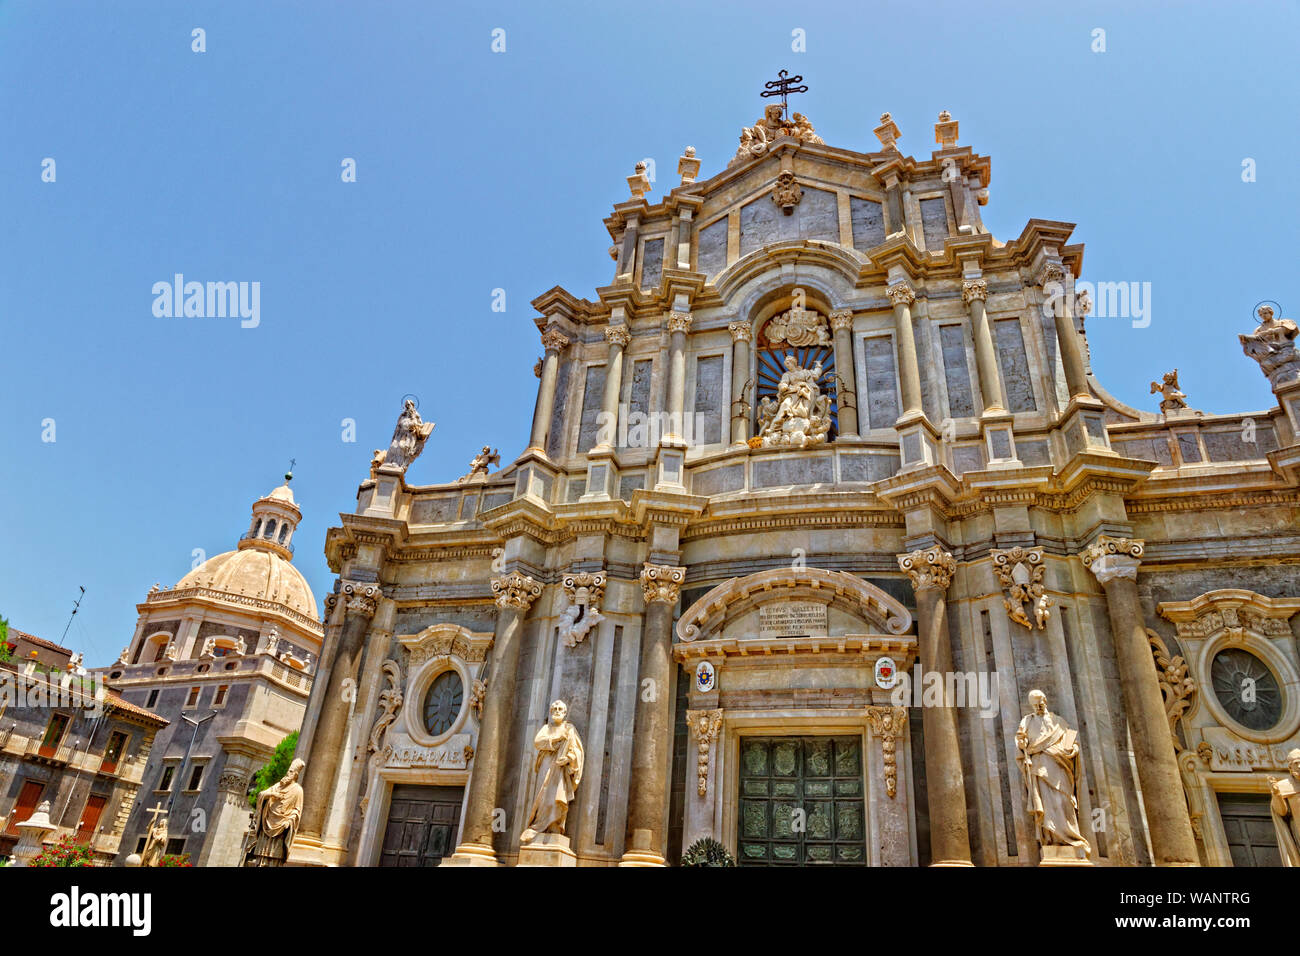 Fassade der St. Agatha's Cathedral in Piazza del Duomo, Catania, Sizilien. Stockfoto